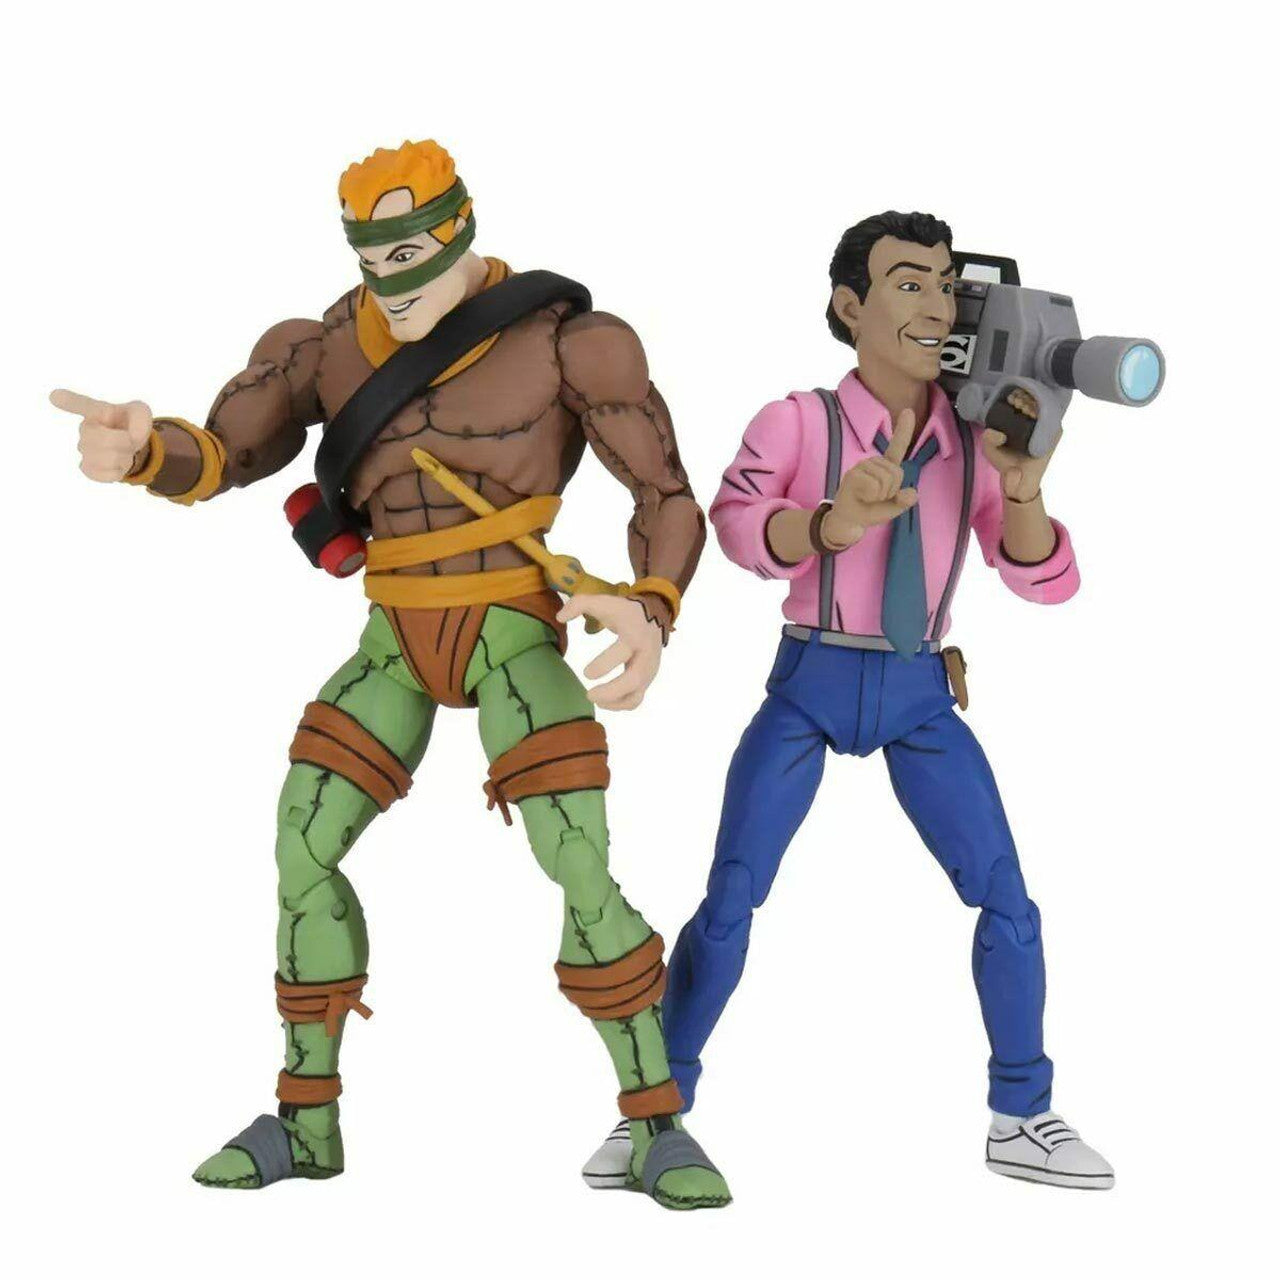 Rat King & Vernon TMNT 2 Pack Action Figures By Neca